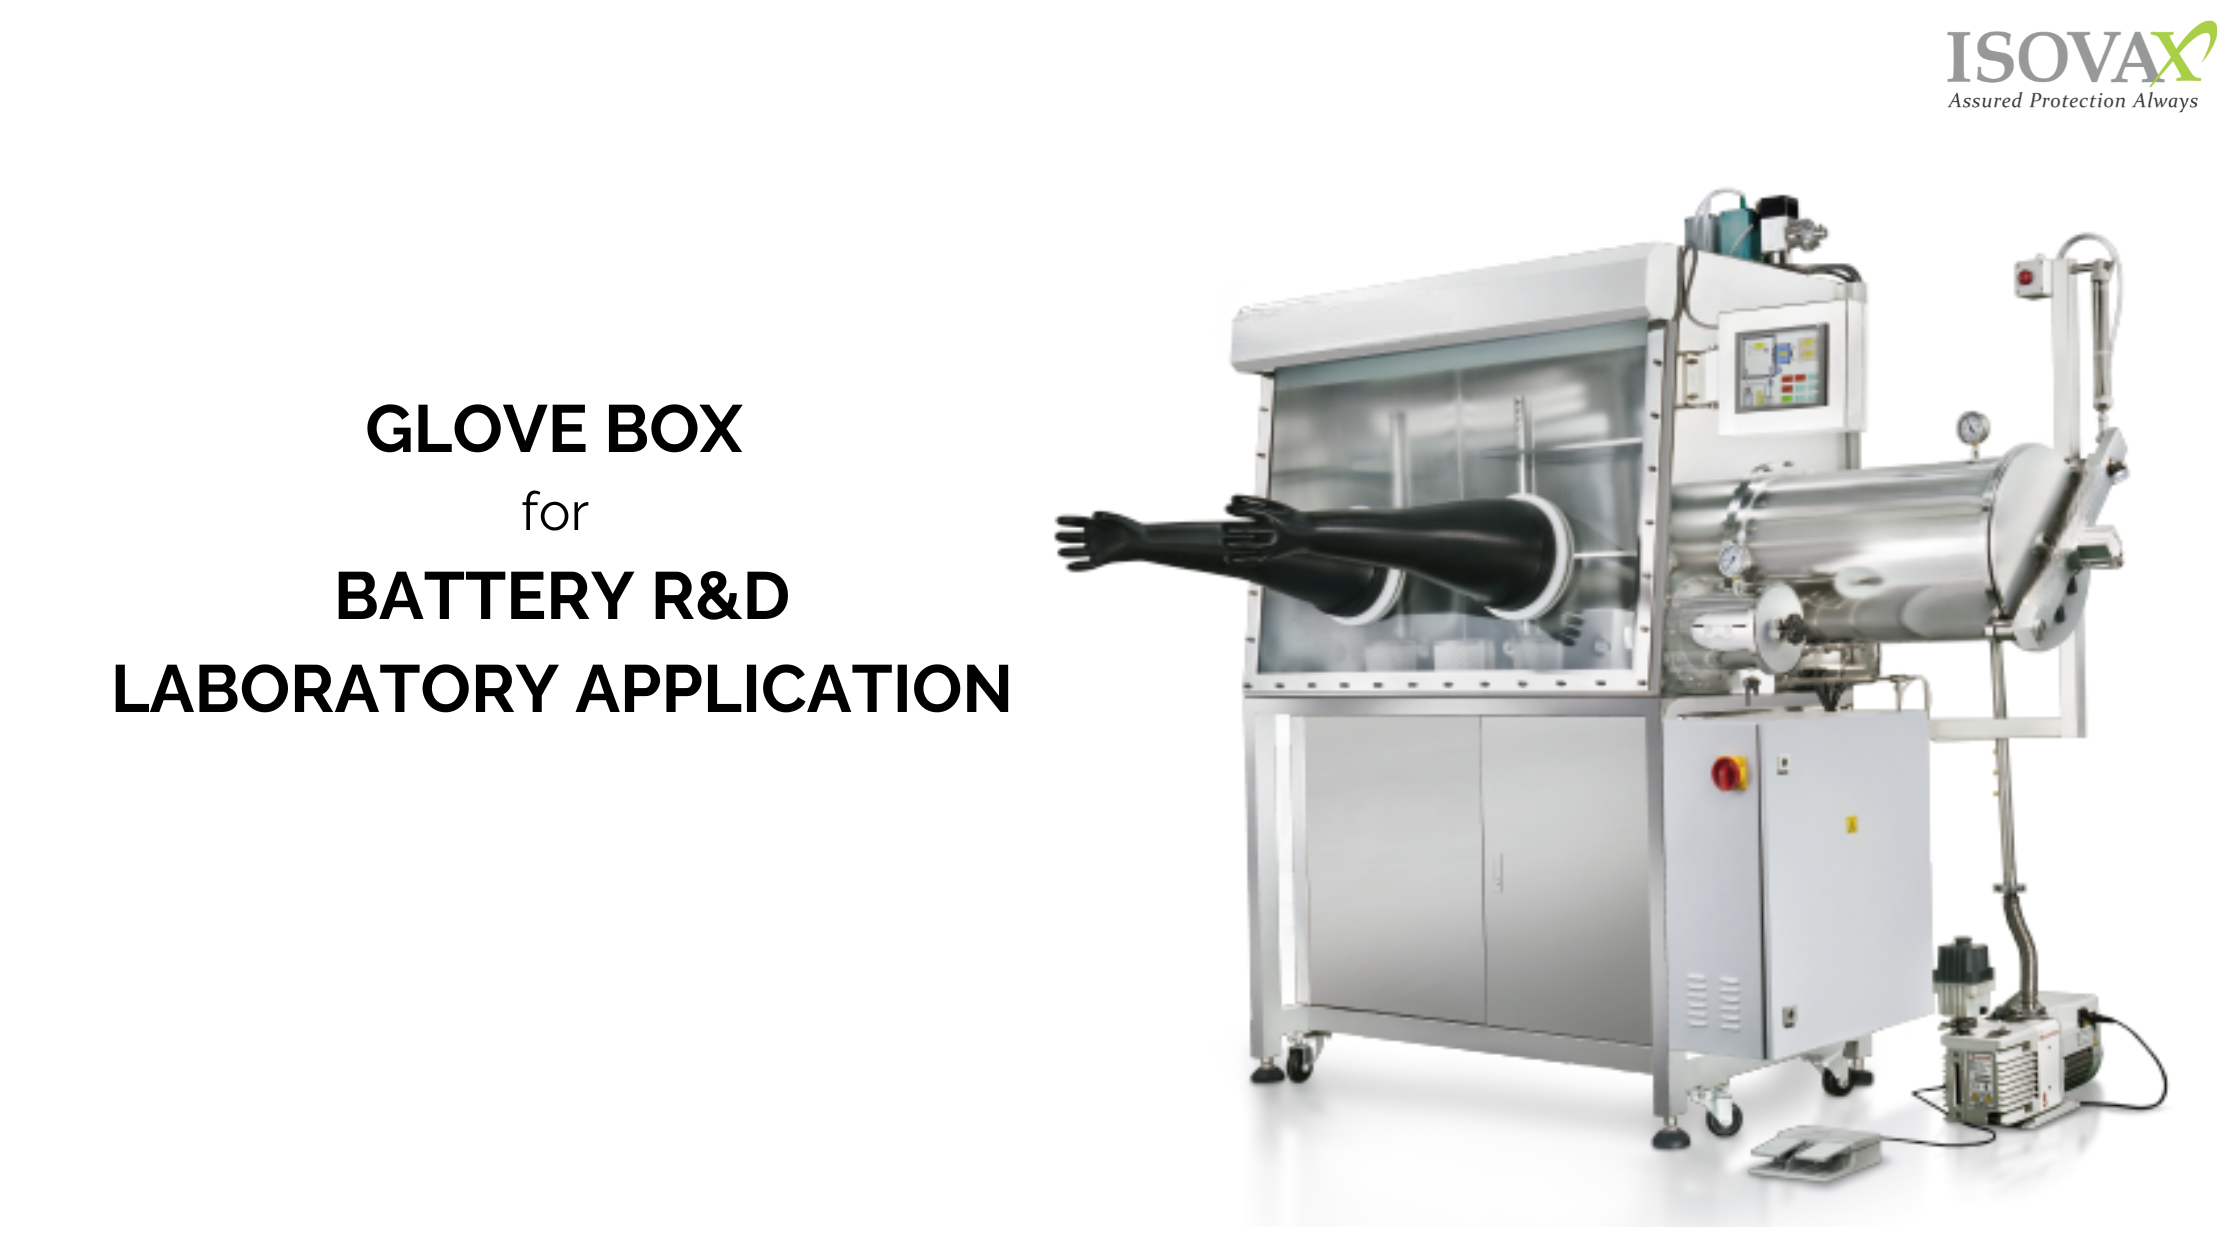 Glove box for battery R&D Laboratory application